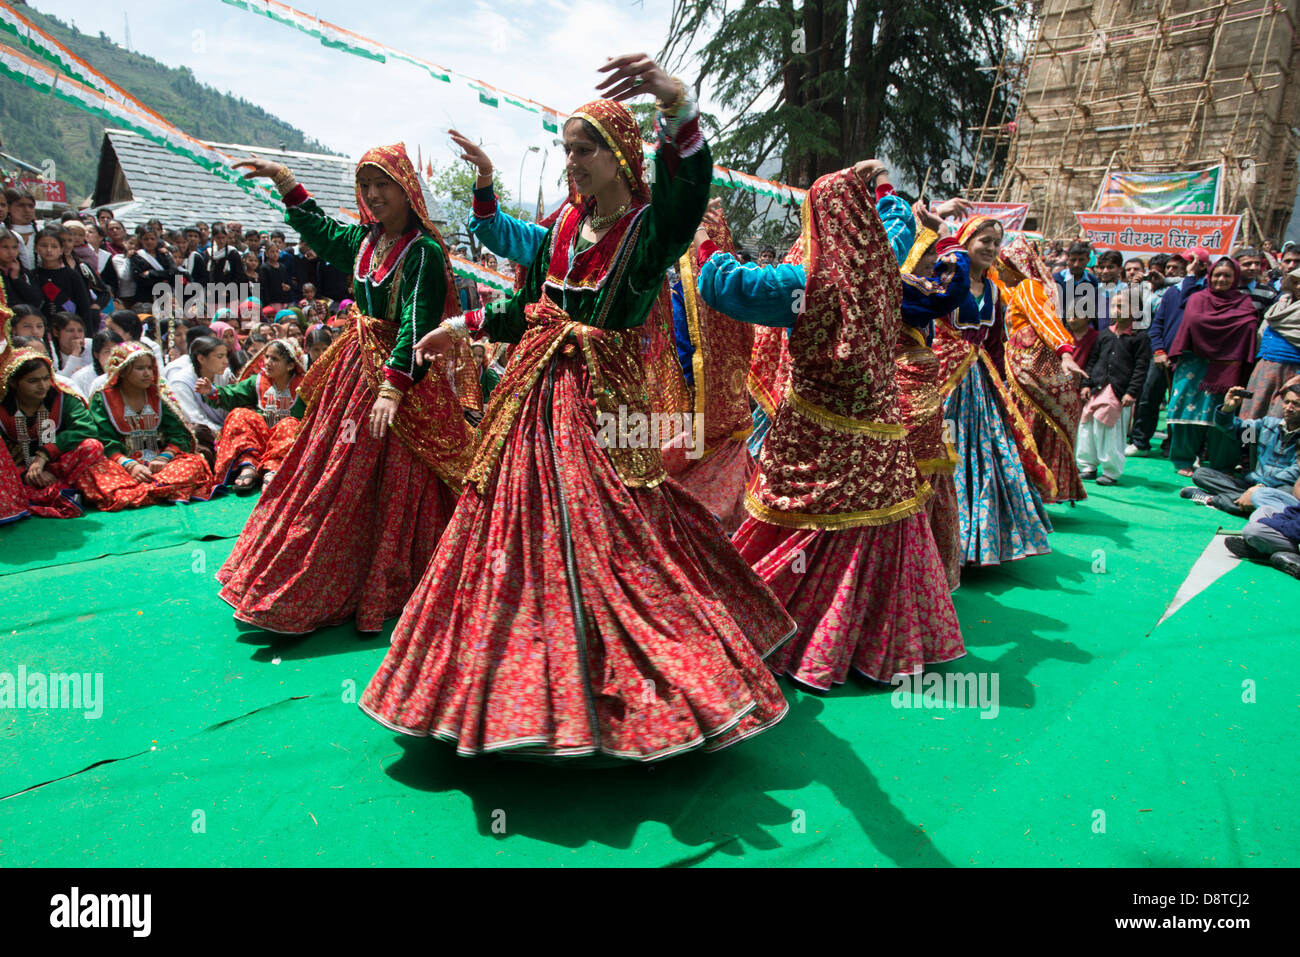 A troupe of Gaddi tribeswomen perform a local folk dance in the Chamba district of Himachal Pradesh, India Stock Photo